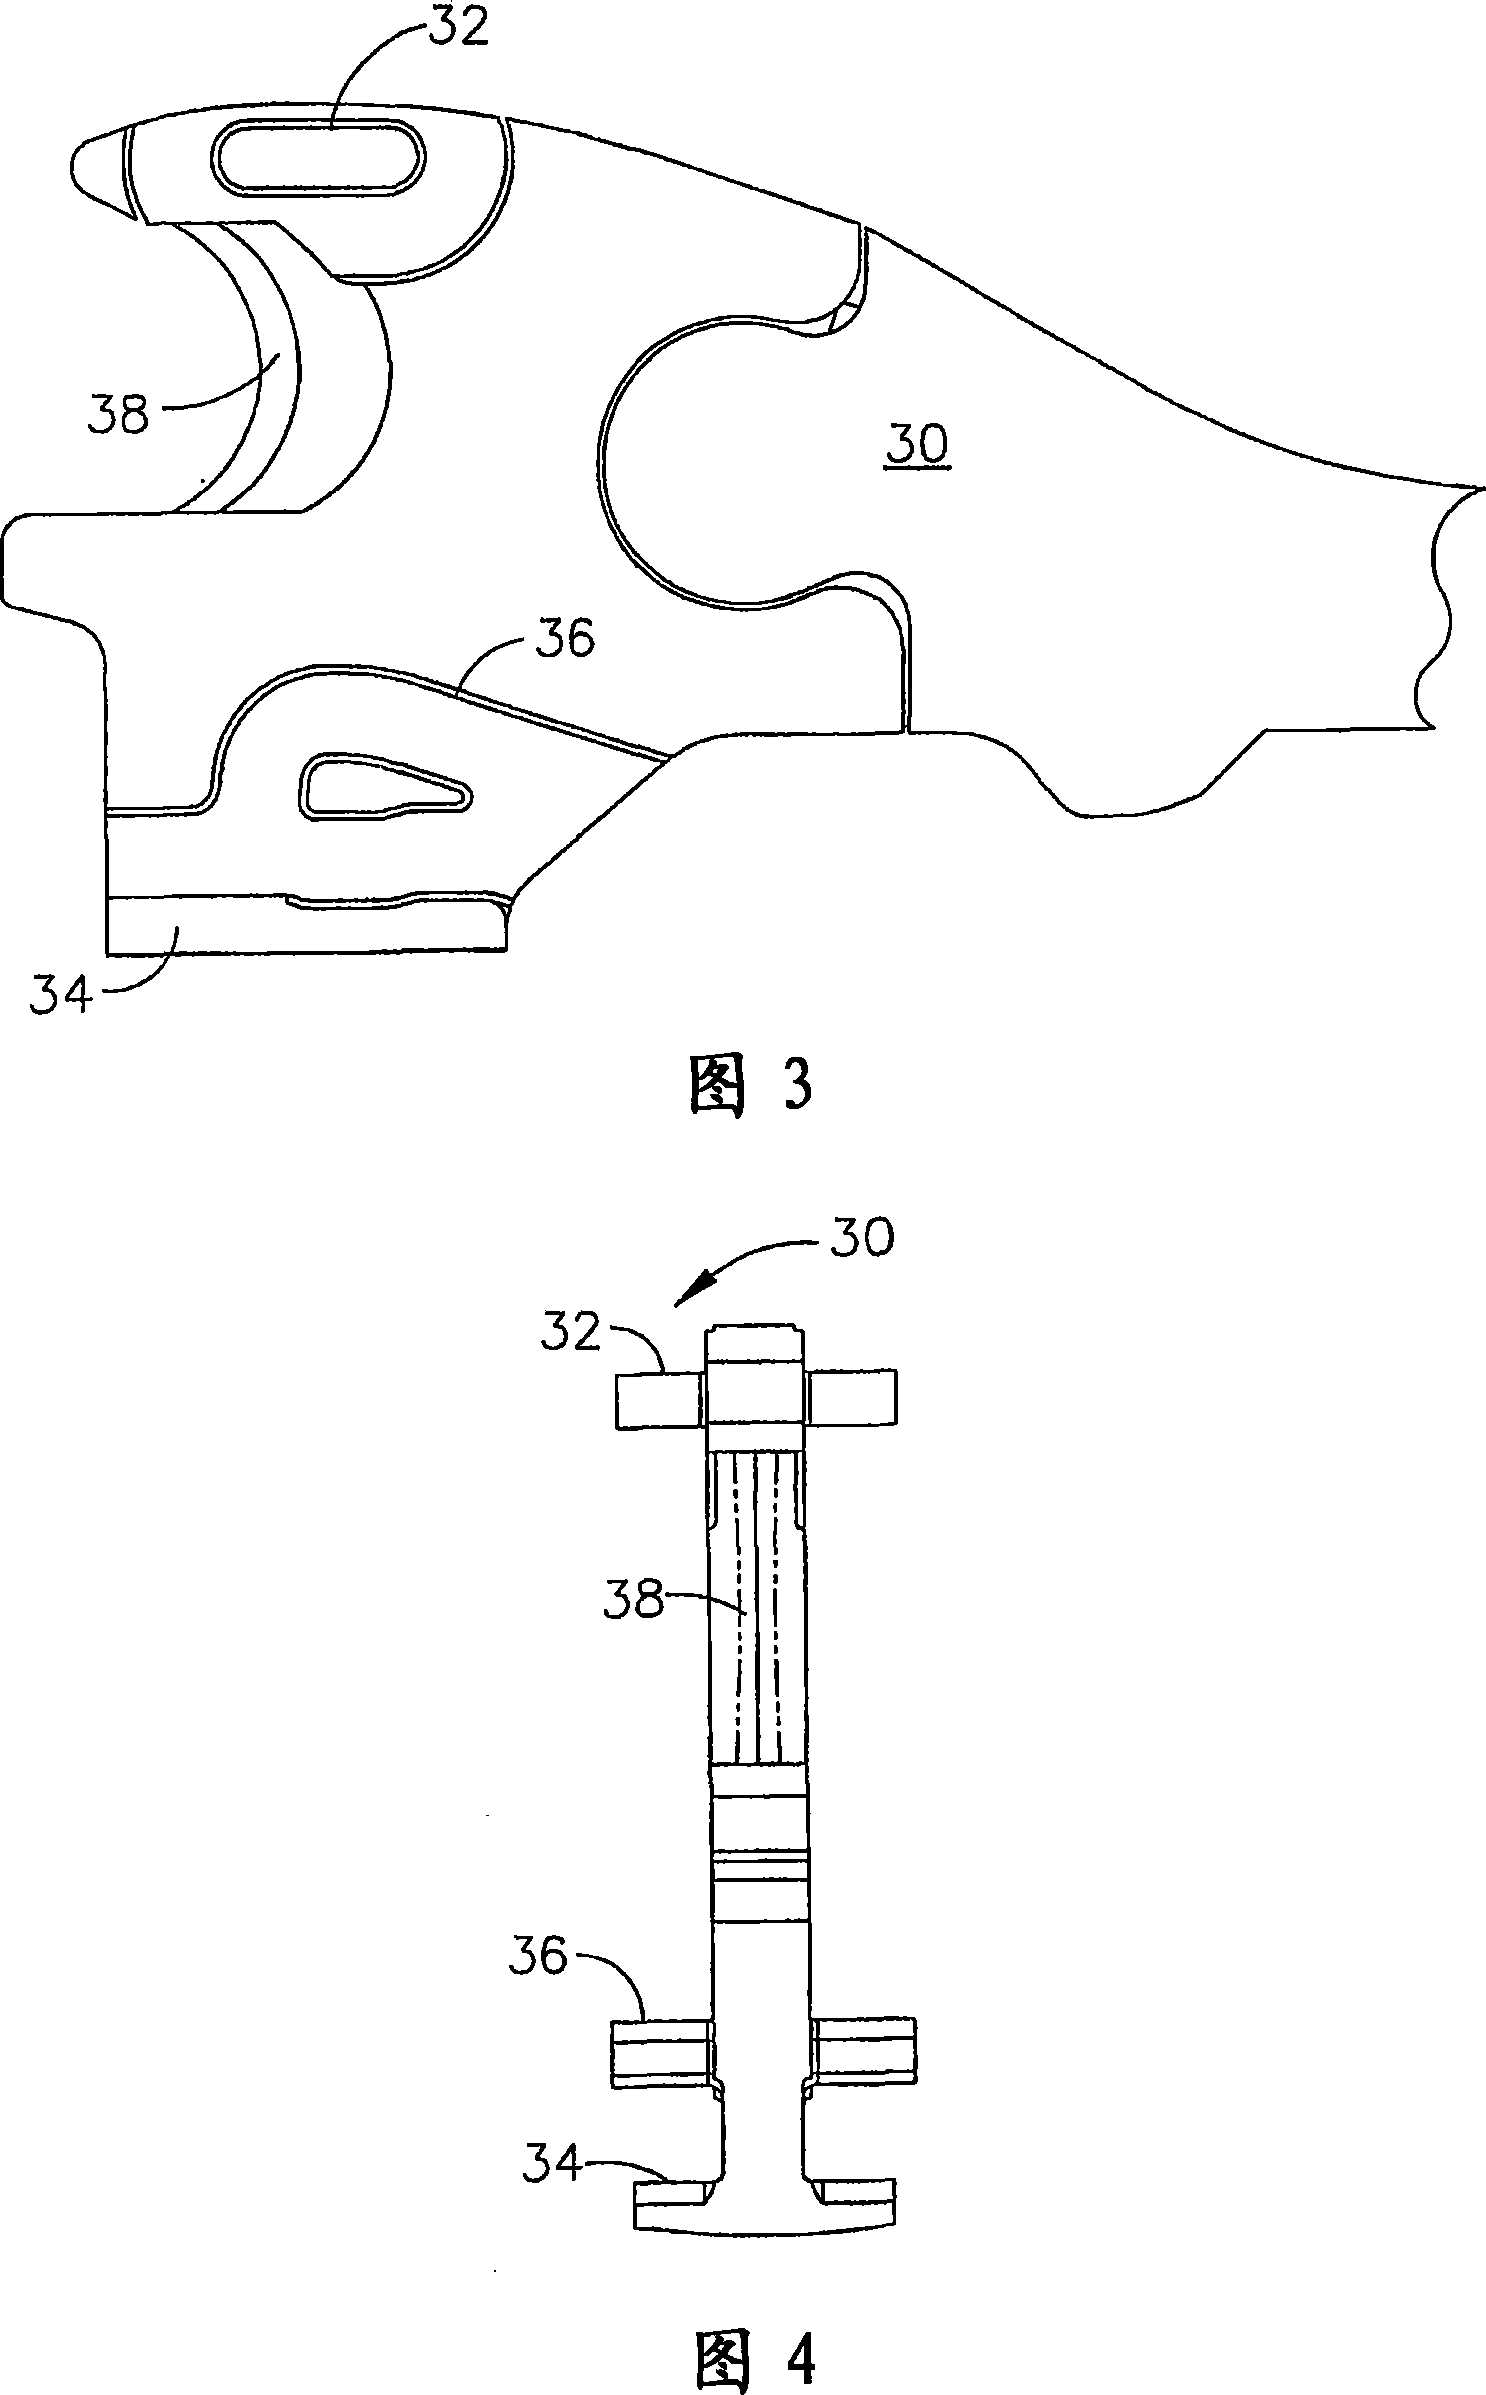 Manually driven surgical cutting and fastening instrument